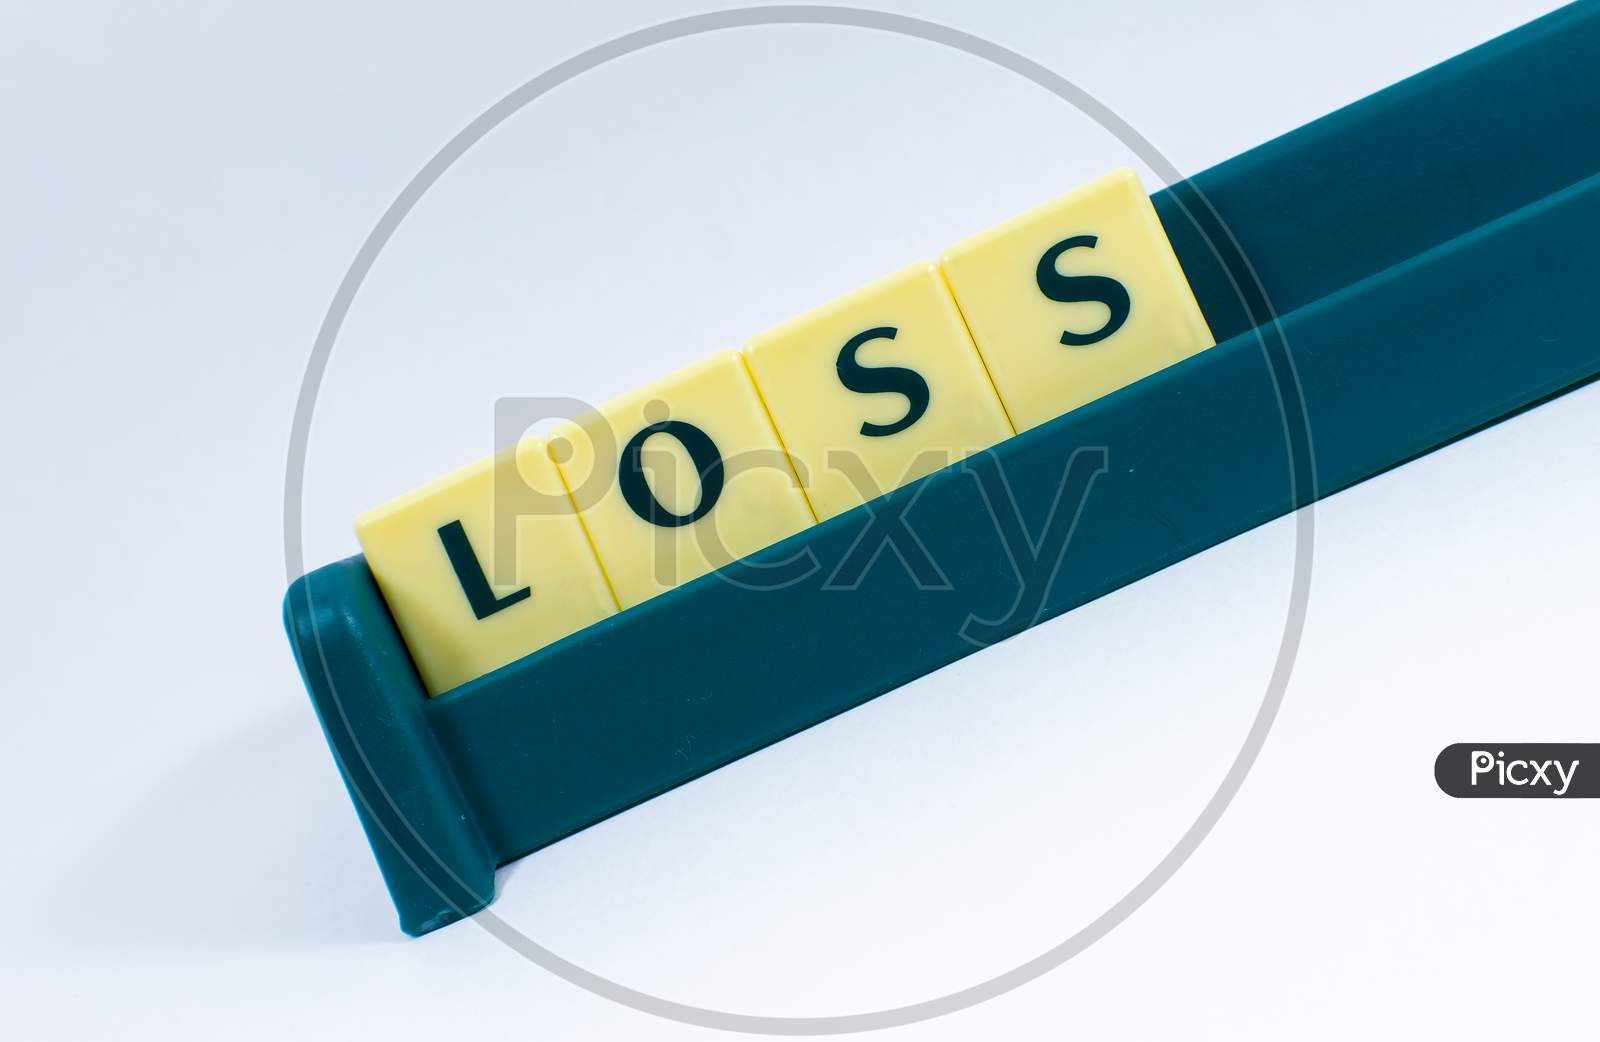 Concept Loss word design image for stock market or any type monetary transaction by block letter for various purposes financial work